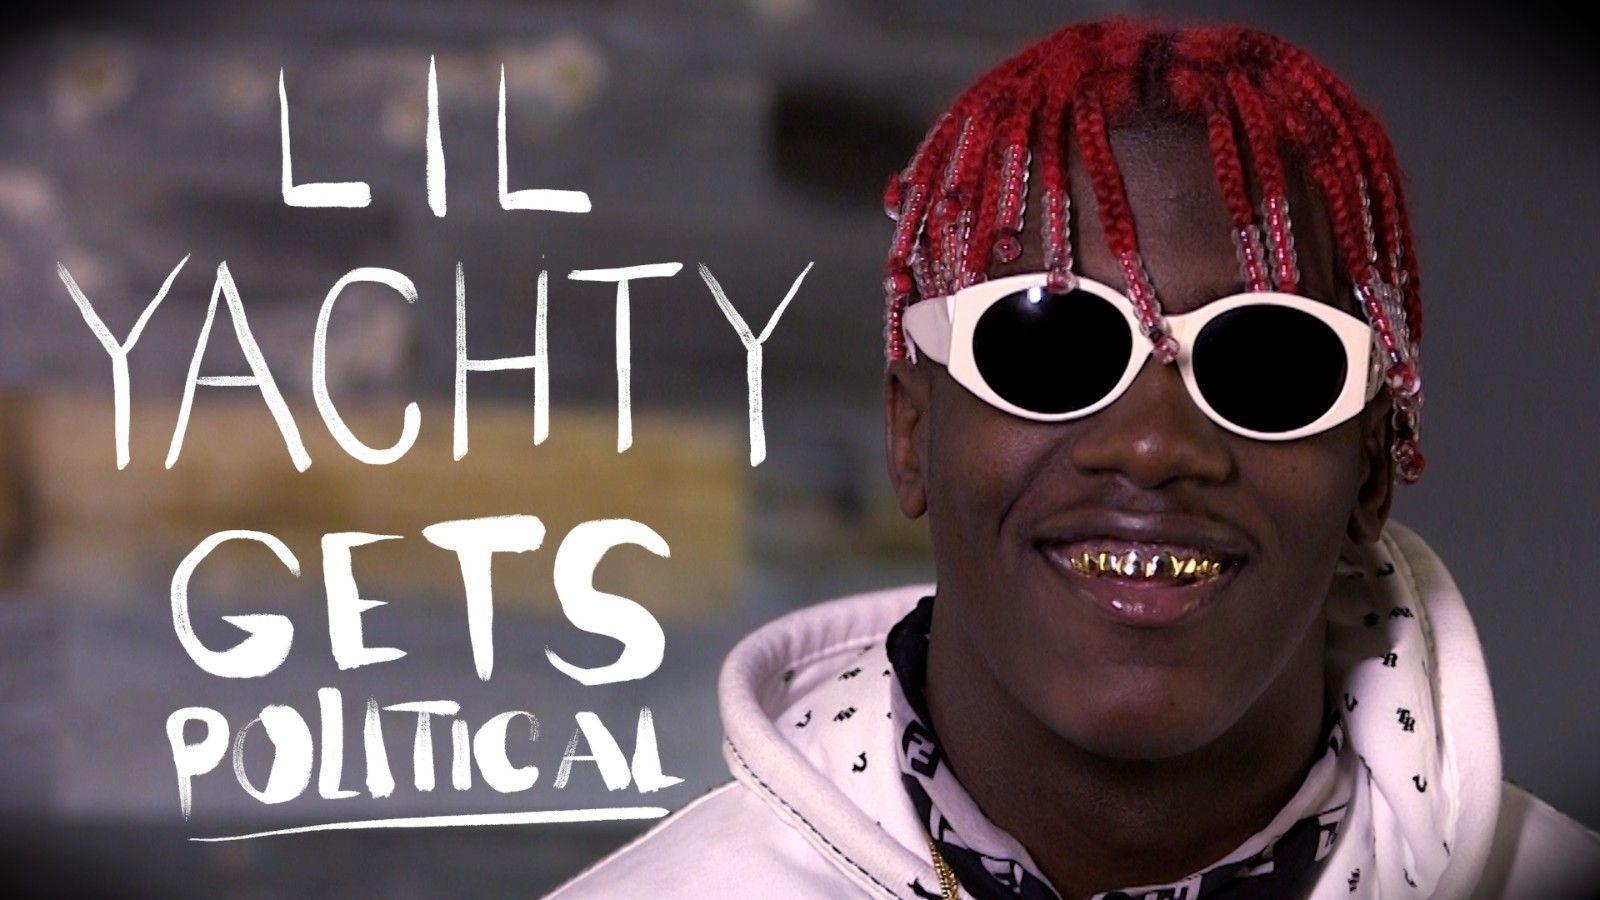 Rapper Lil Yachty has Lil B to thank for getting into Bernie